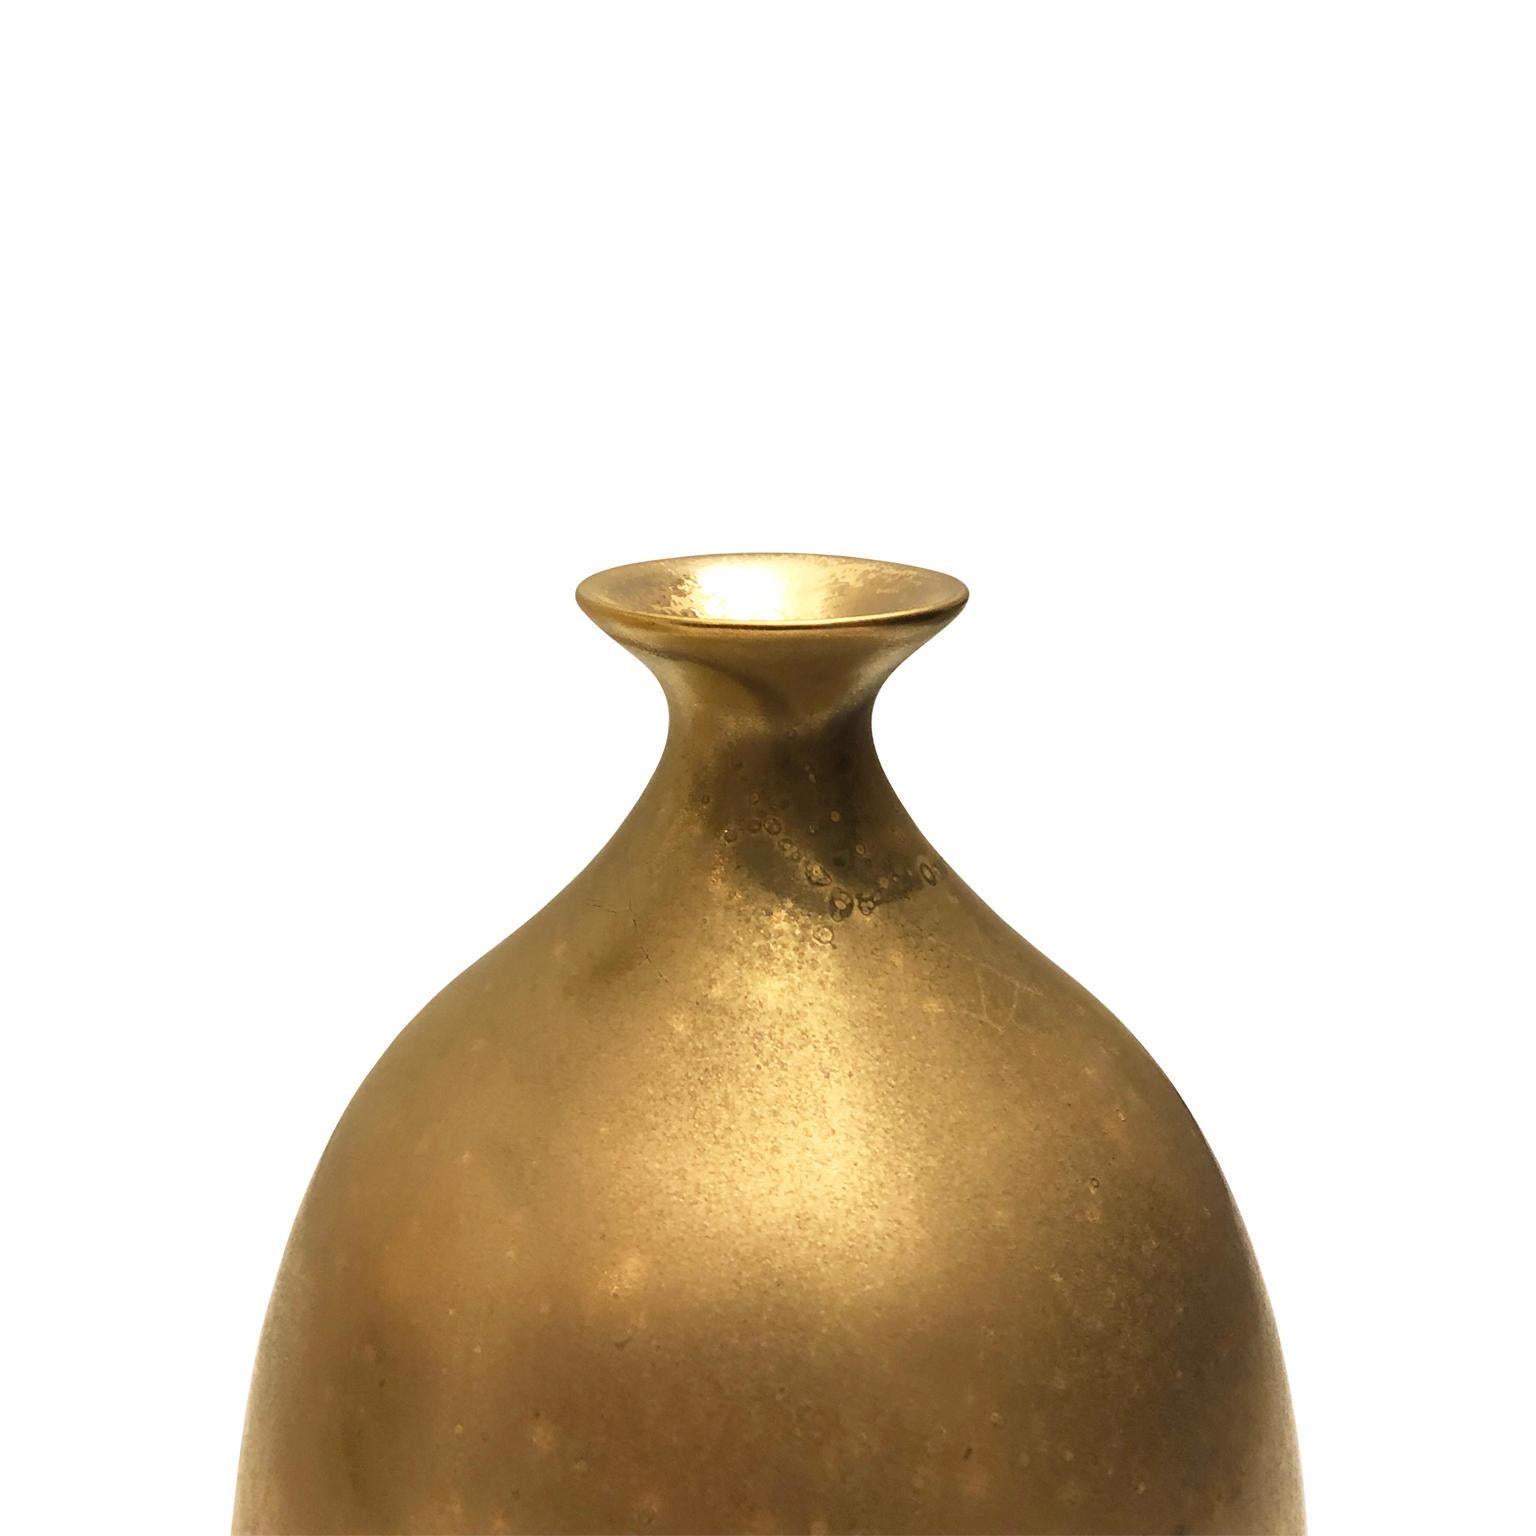 Small ceramic bottle vase with flared bottom and burnished gold lustre glaze by Sandi Fellman, 2019. 

Veteran photographer Sandi Fellman's ceramic vessels are an exploration of a new medium. The forms, palettes, and sensuality of her photos can